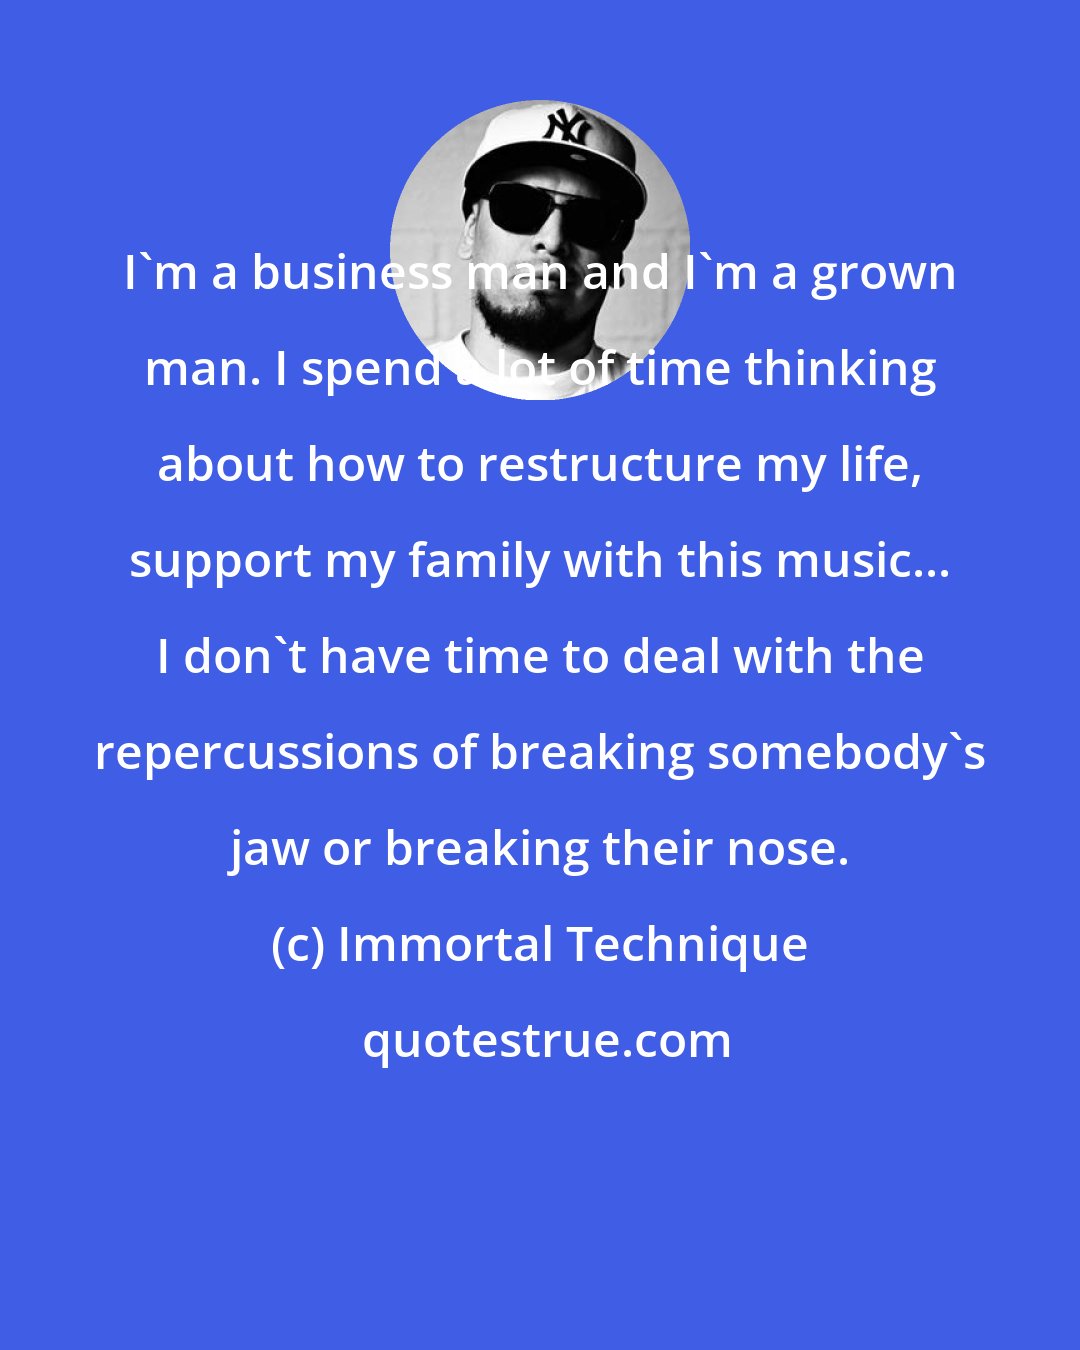 Immortal Technique: I'm a business man and I'm a grown man. I spend a lot of time thinking about how to restructure my life, support my family with this music... I don't have time to deal with the repercussions of breaking somebody's jaw or breaking their nose.